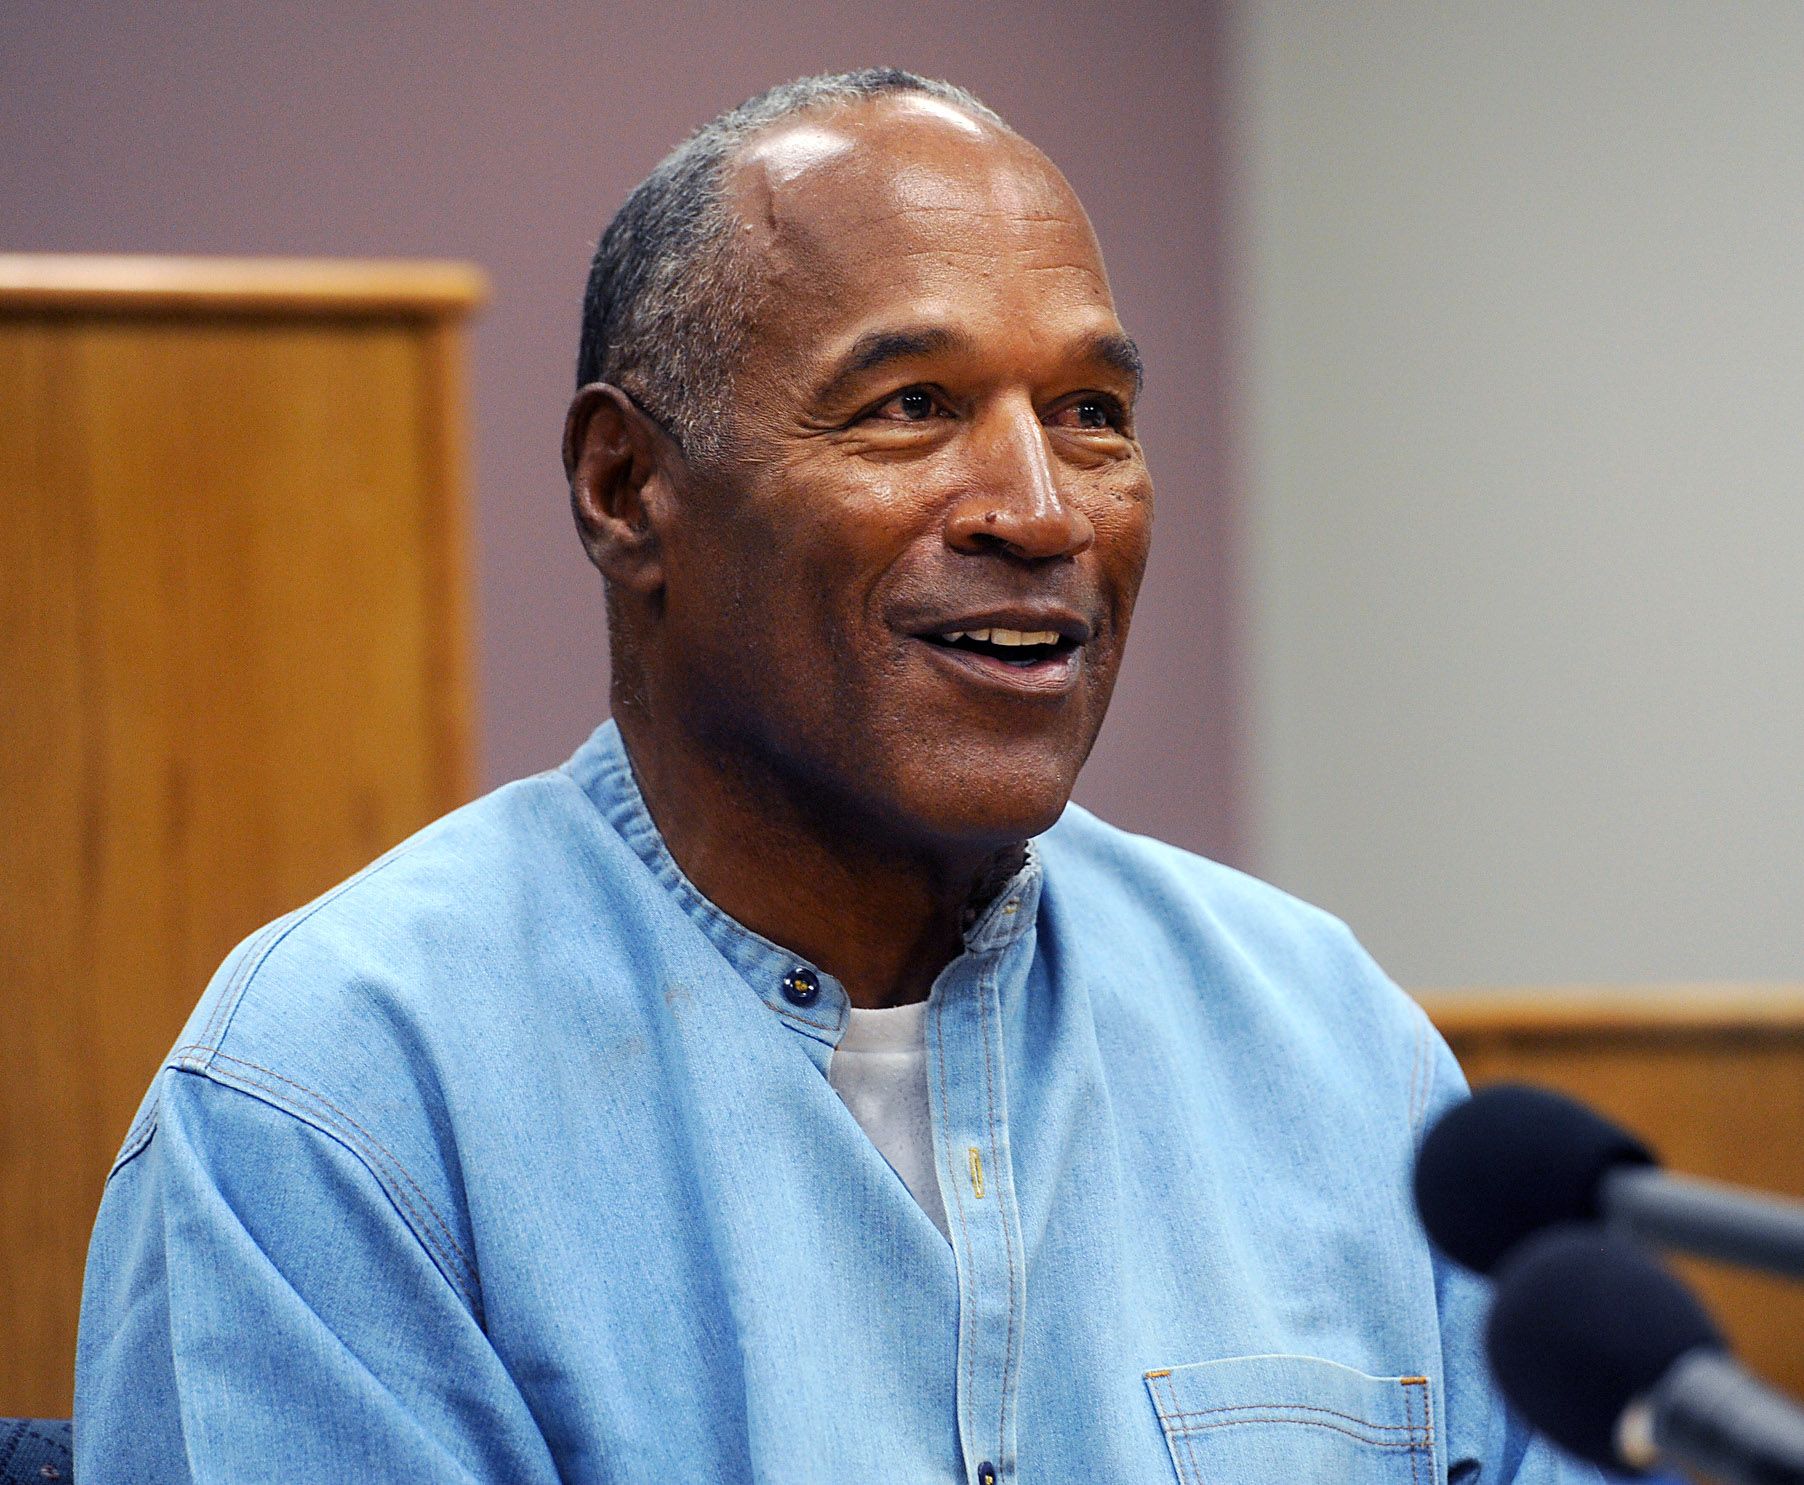 O.J. Simpson Net Worth Today 2018 - What Is O.J. Simpson Doing Now